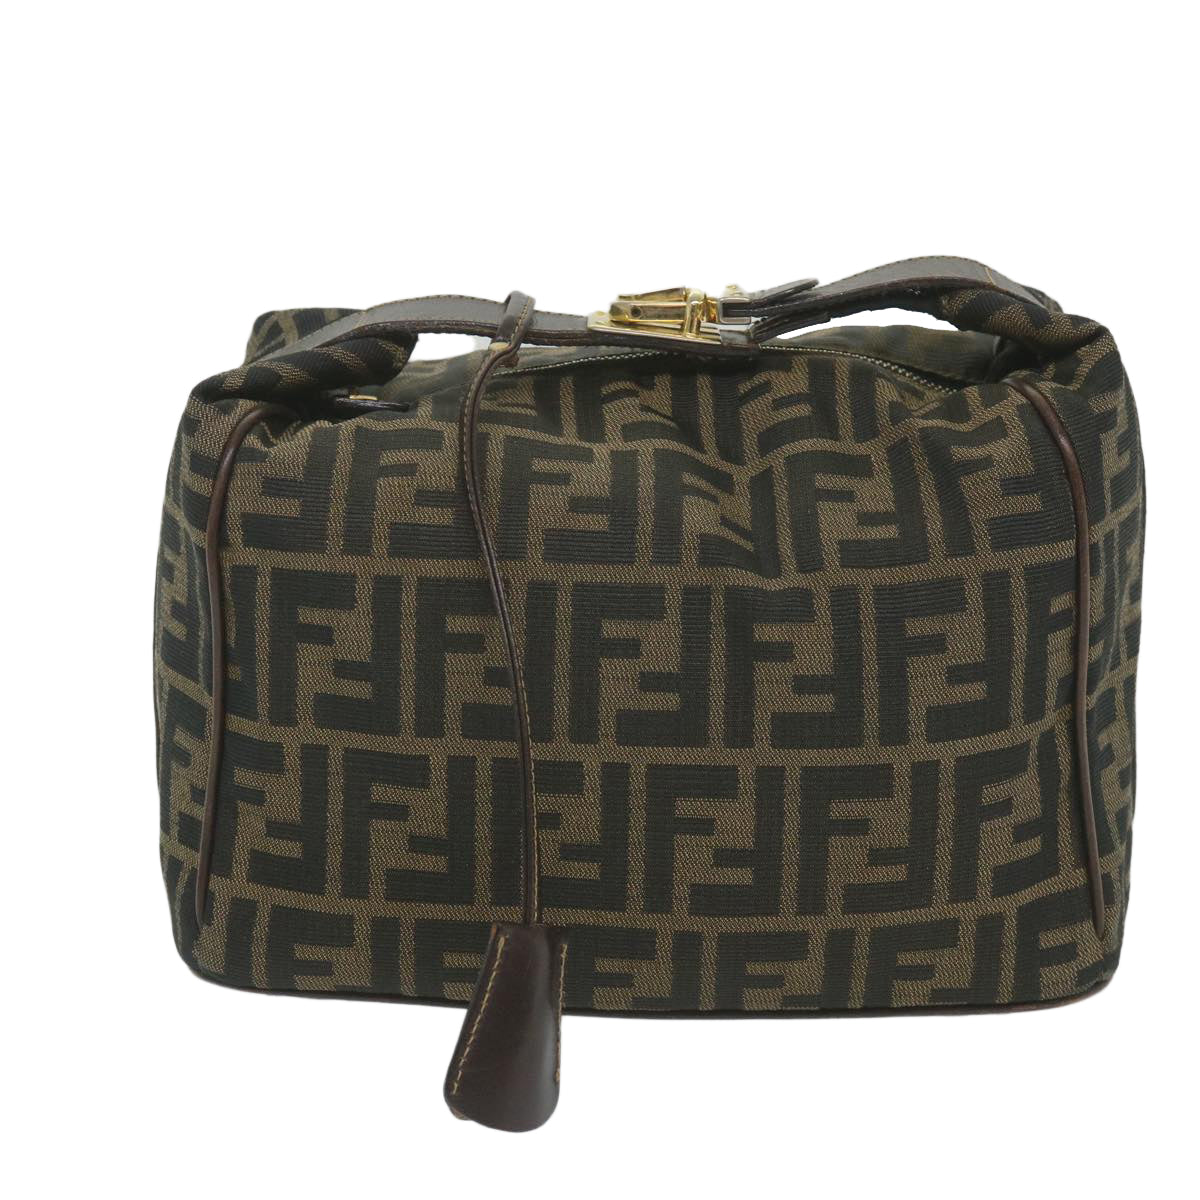 FENDI Zucca Canvas Vanity Cosmetic Pouch Black Brown Auth 59689 - 0